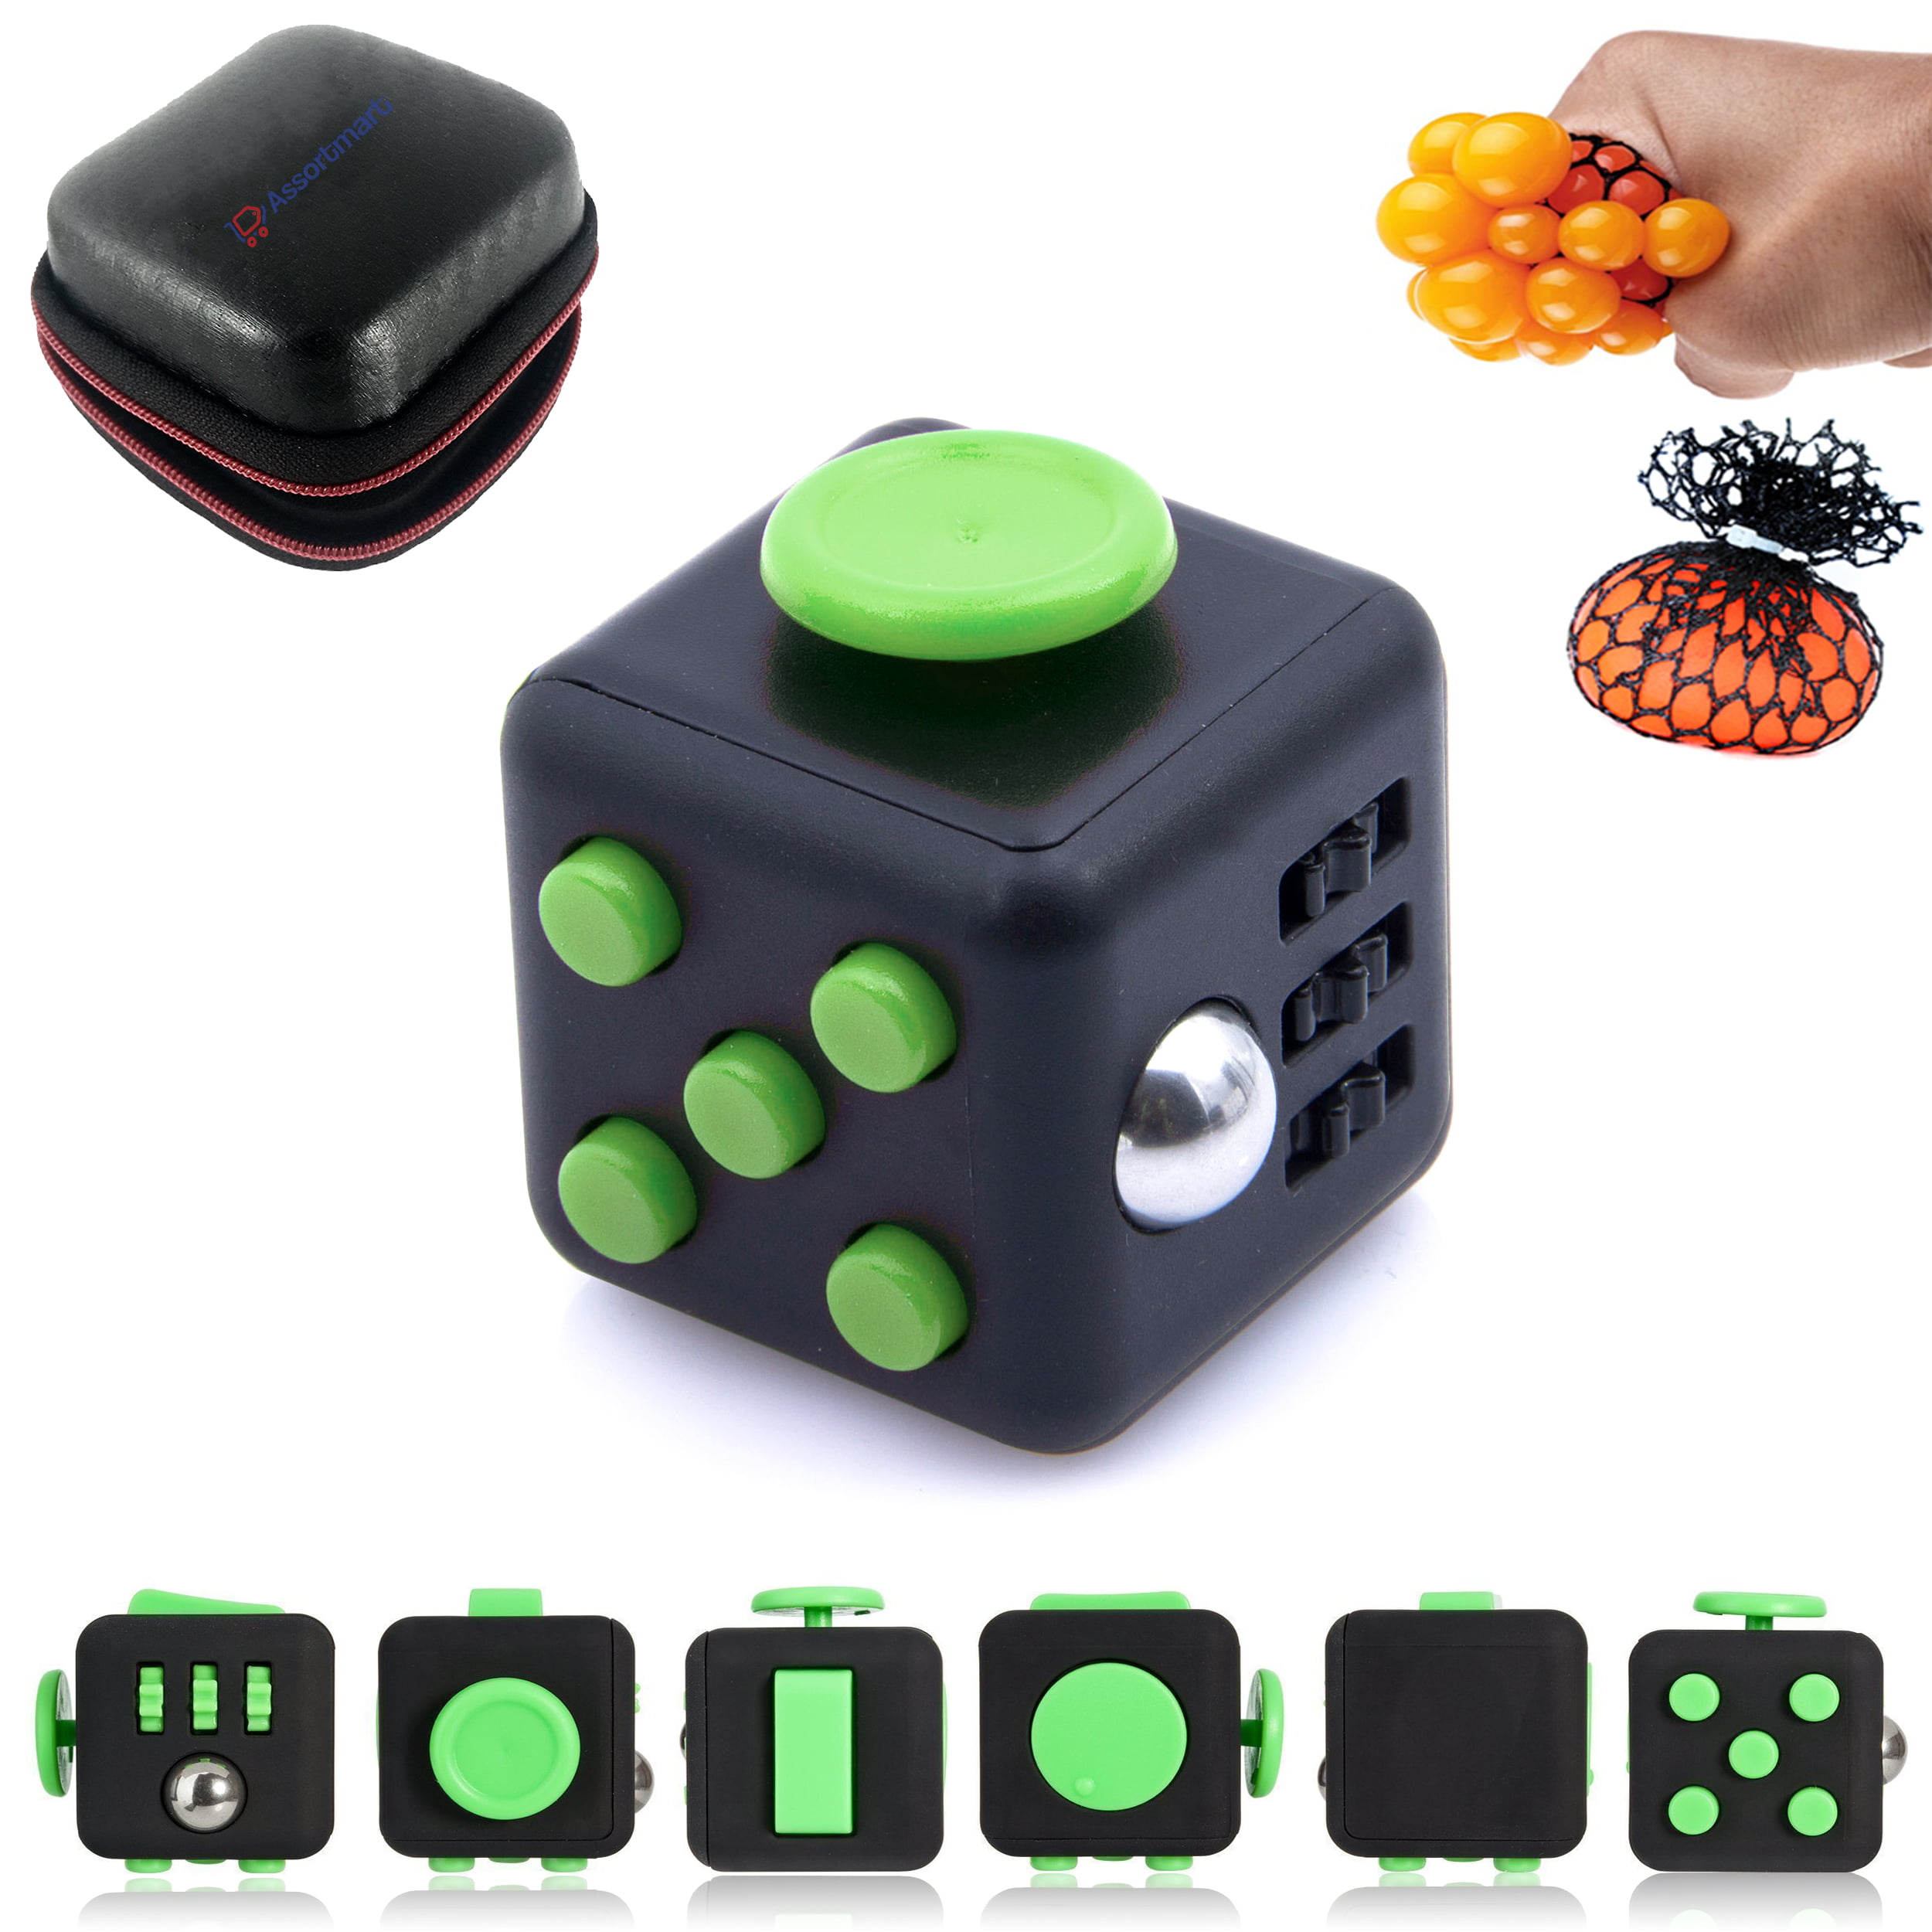 Fidget Cube-Quality Fidget Cube Ball Suitable for Stress Relief for Adults and Children Black White